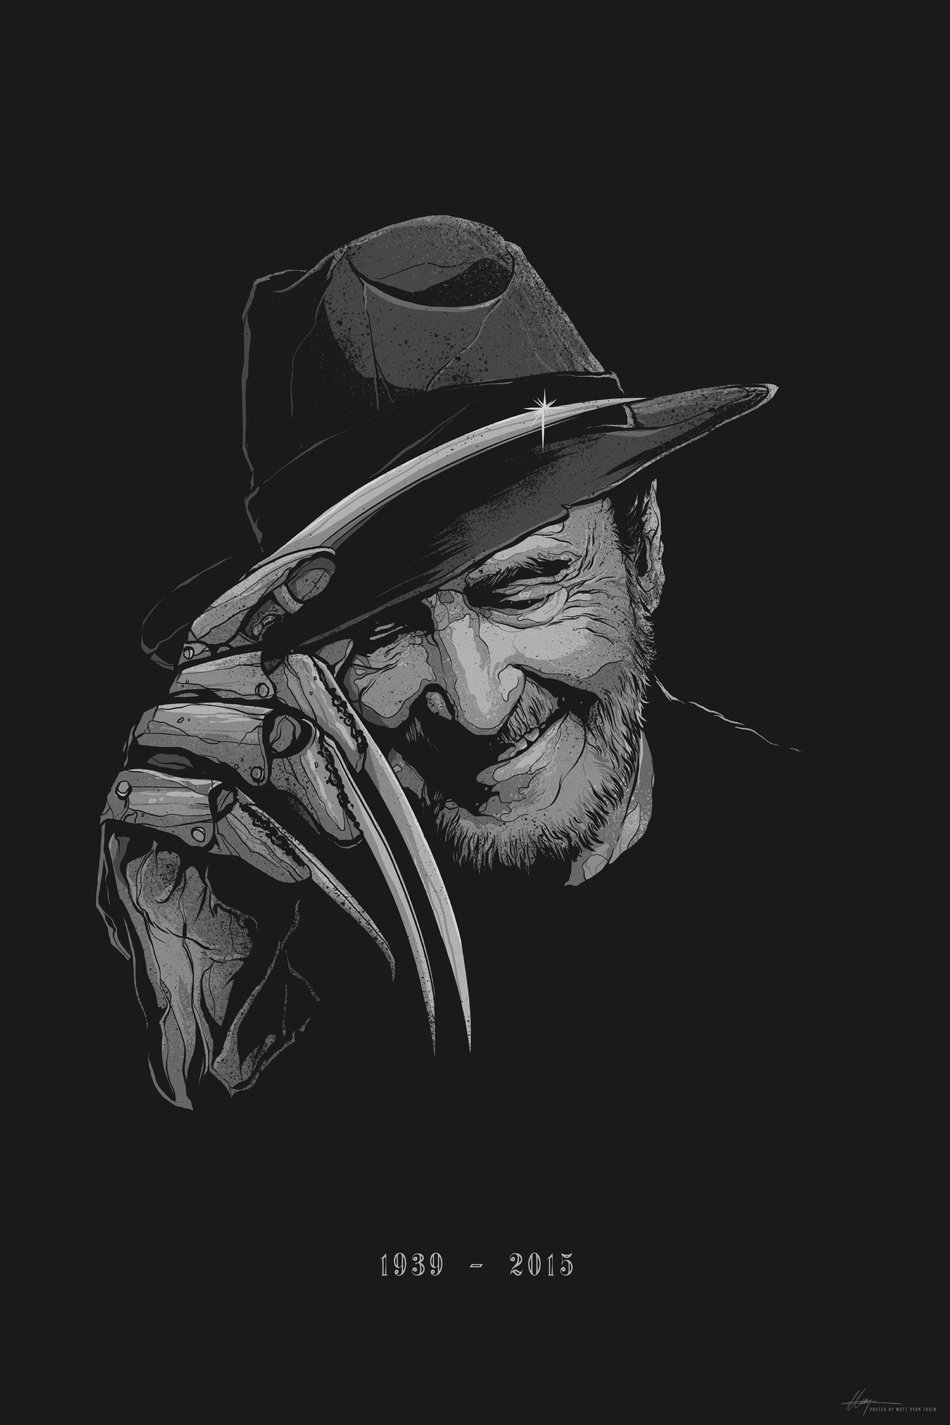 Happy birthday to the late Wes Craven, he defined a genre. 